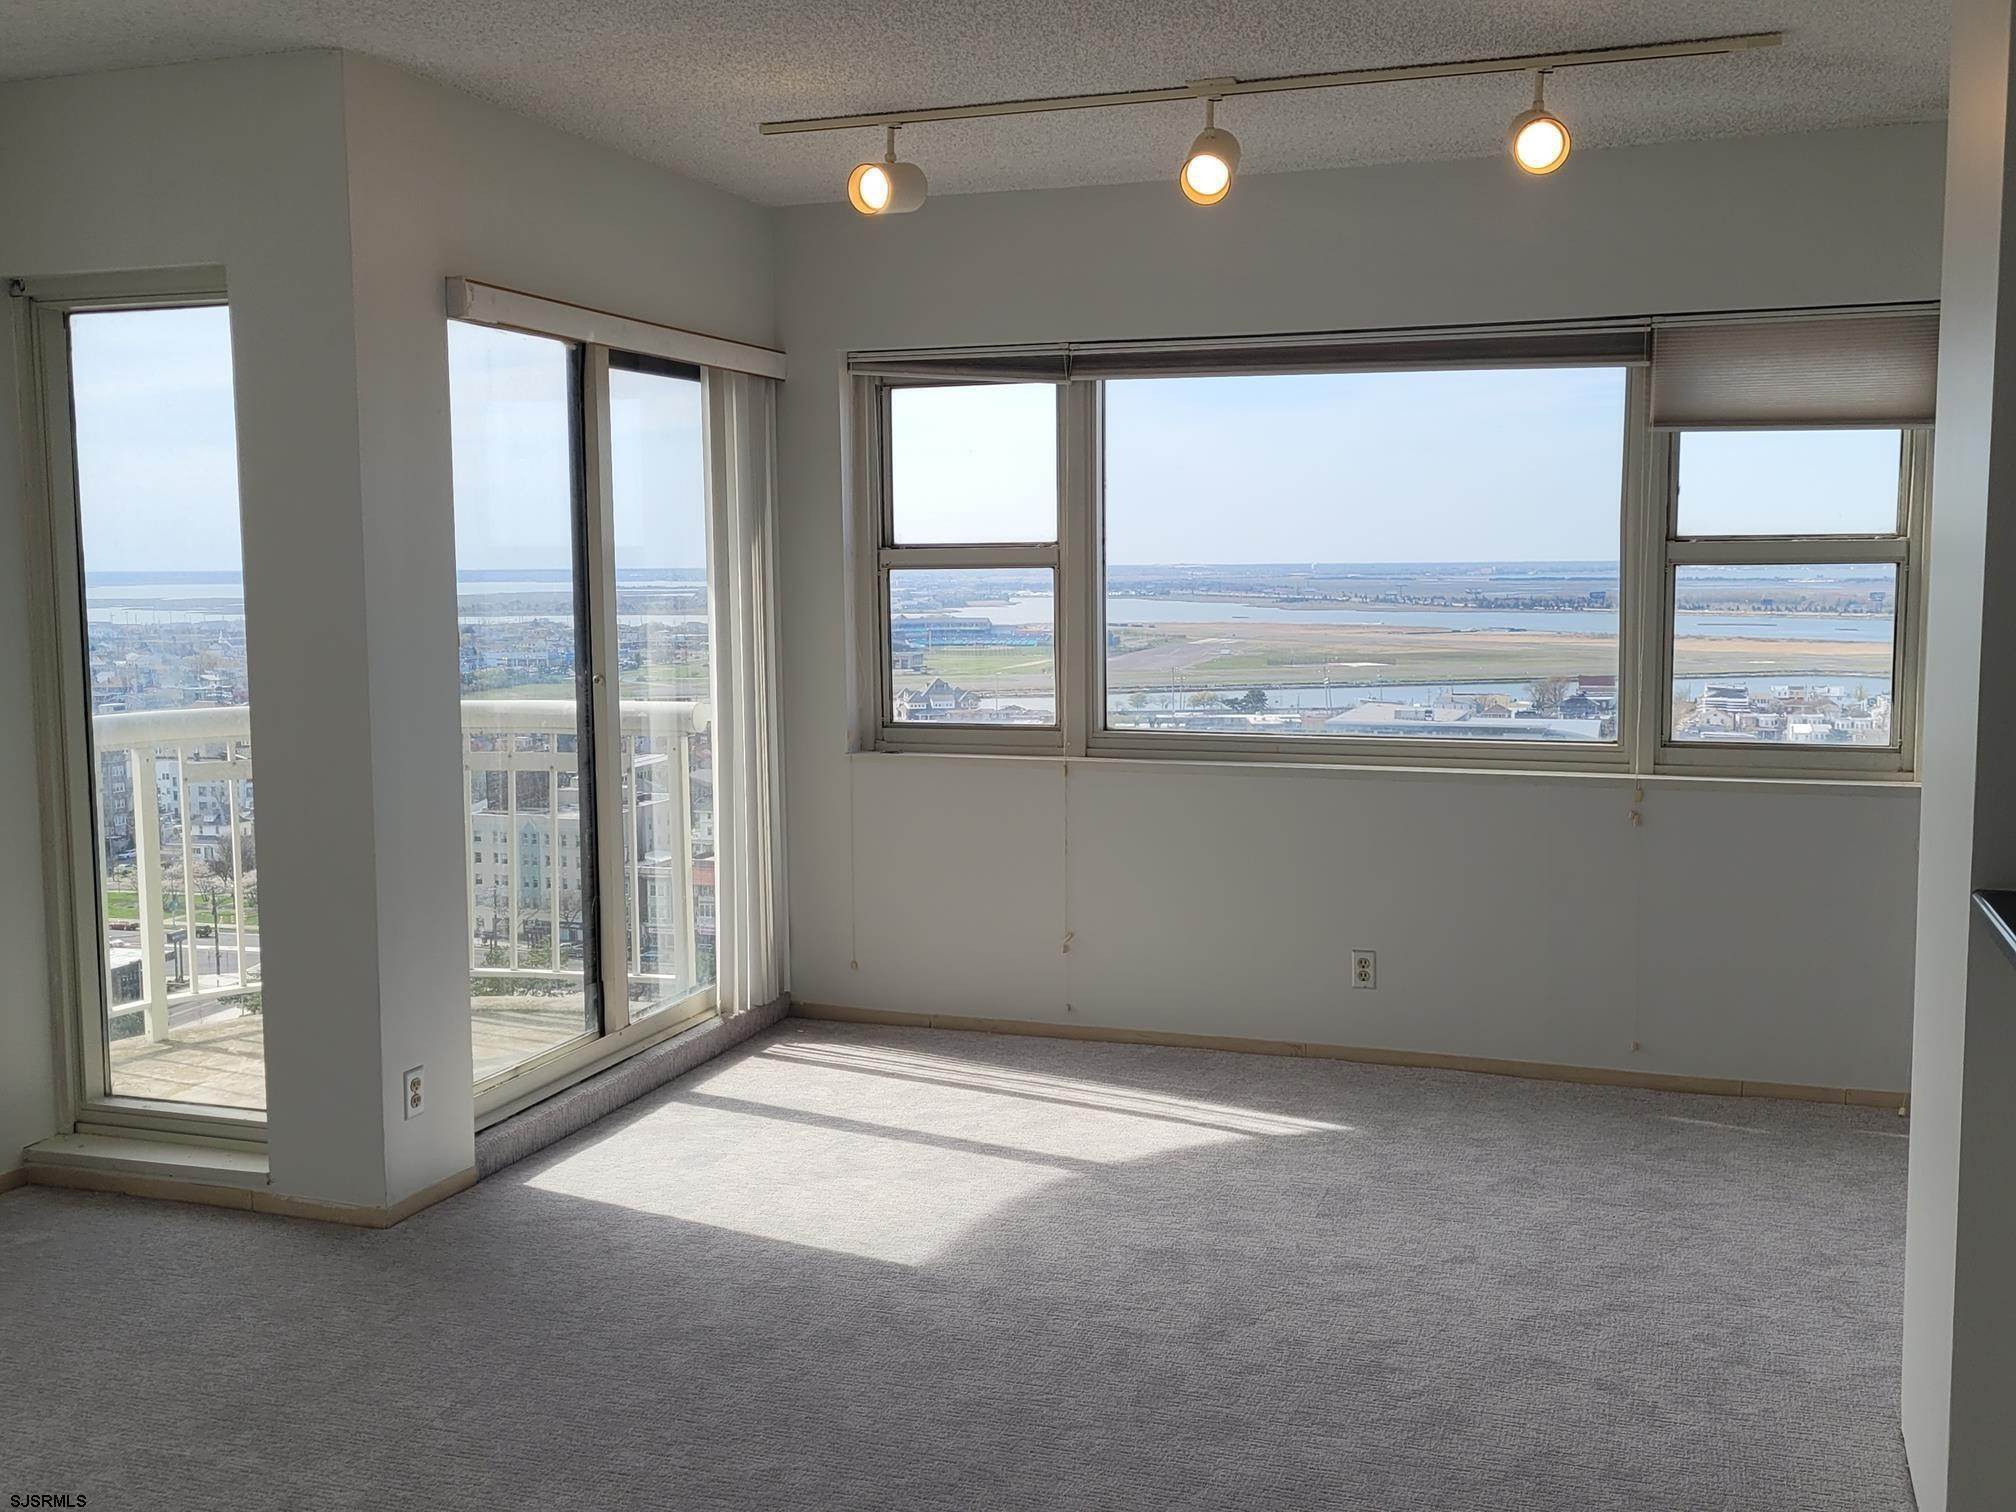 5. Condominiums for Sale at 3101 Boardwalk Atlantic City, New Jersey 08401 United States